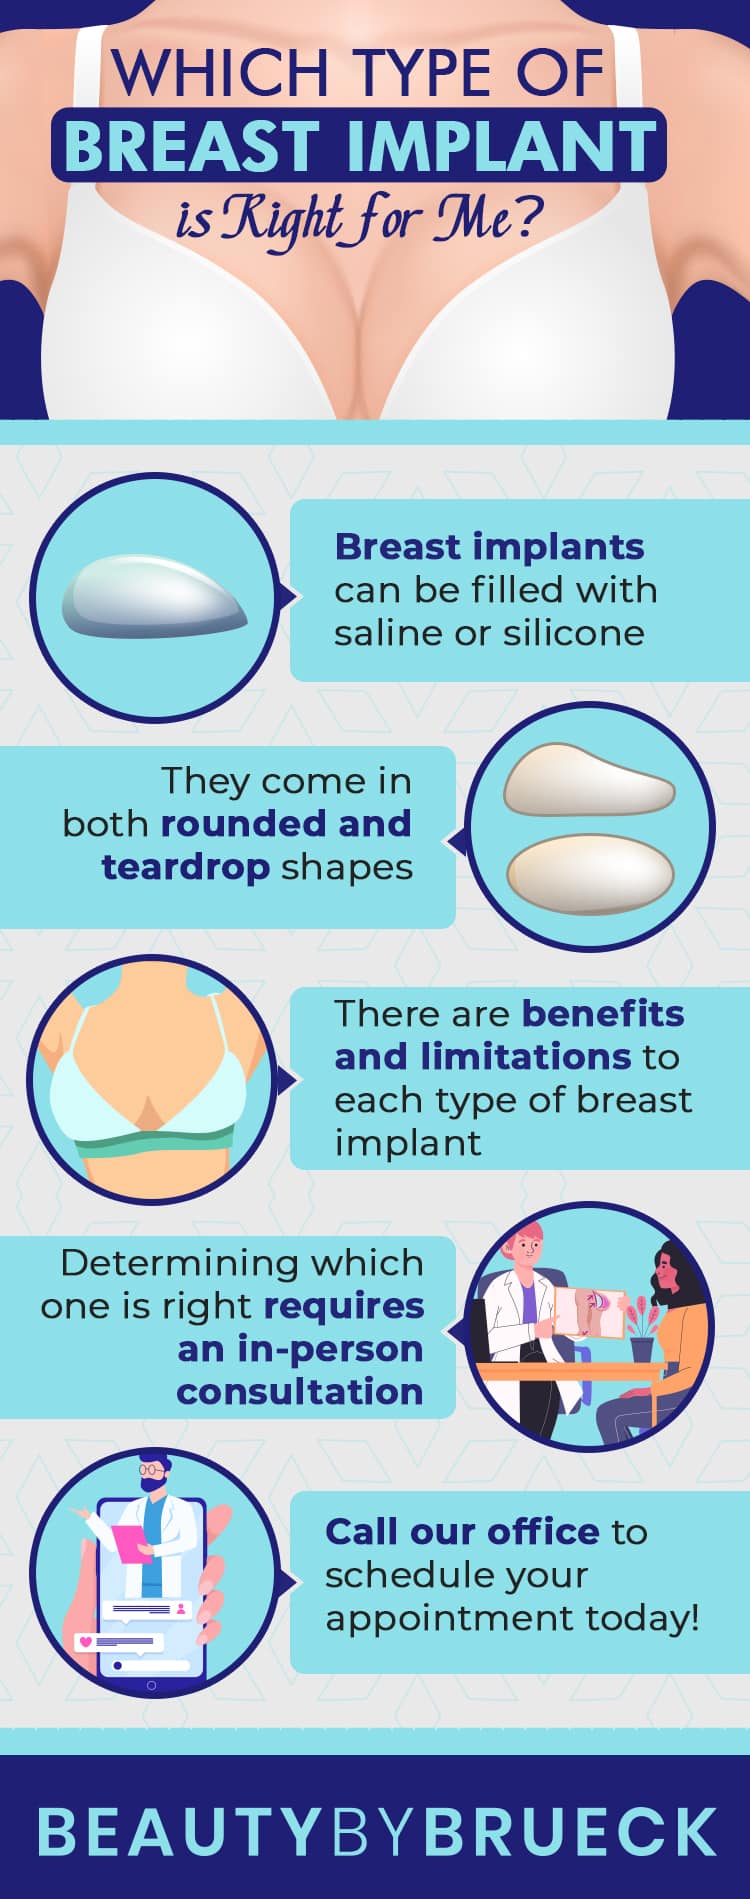 Which type of breast implant is right for me